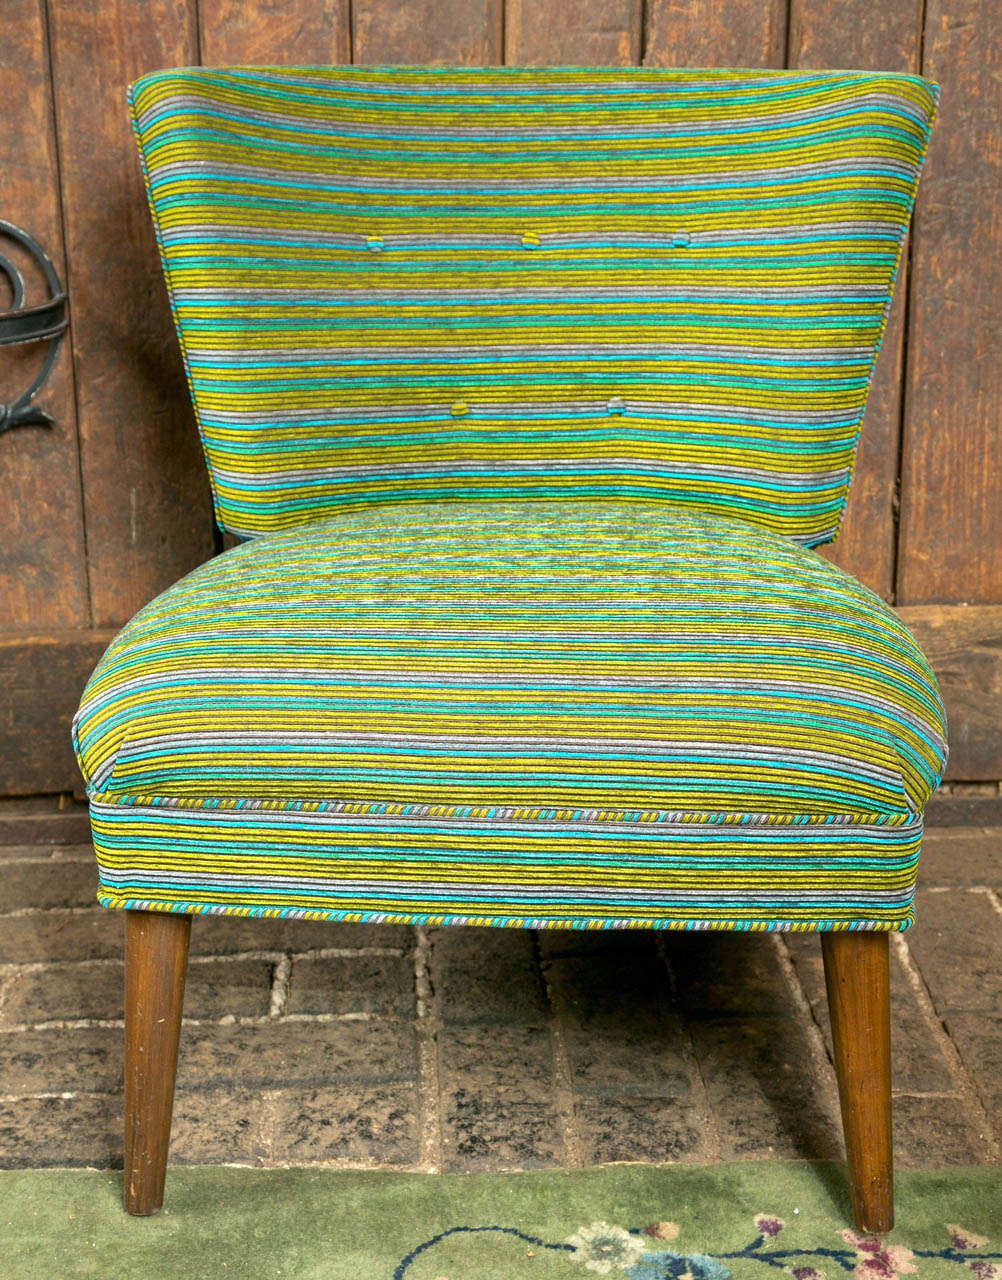 Newly upholstered midcentury modern slipper chair in Osbourne and Little fabric. Seat depth is 19.5